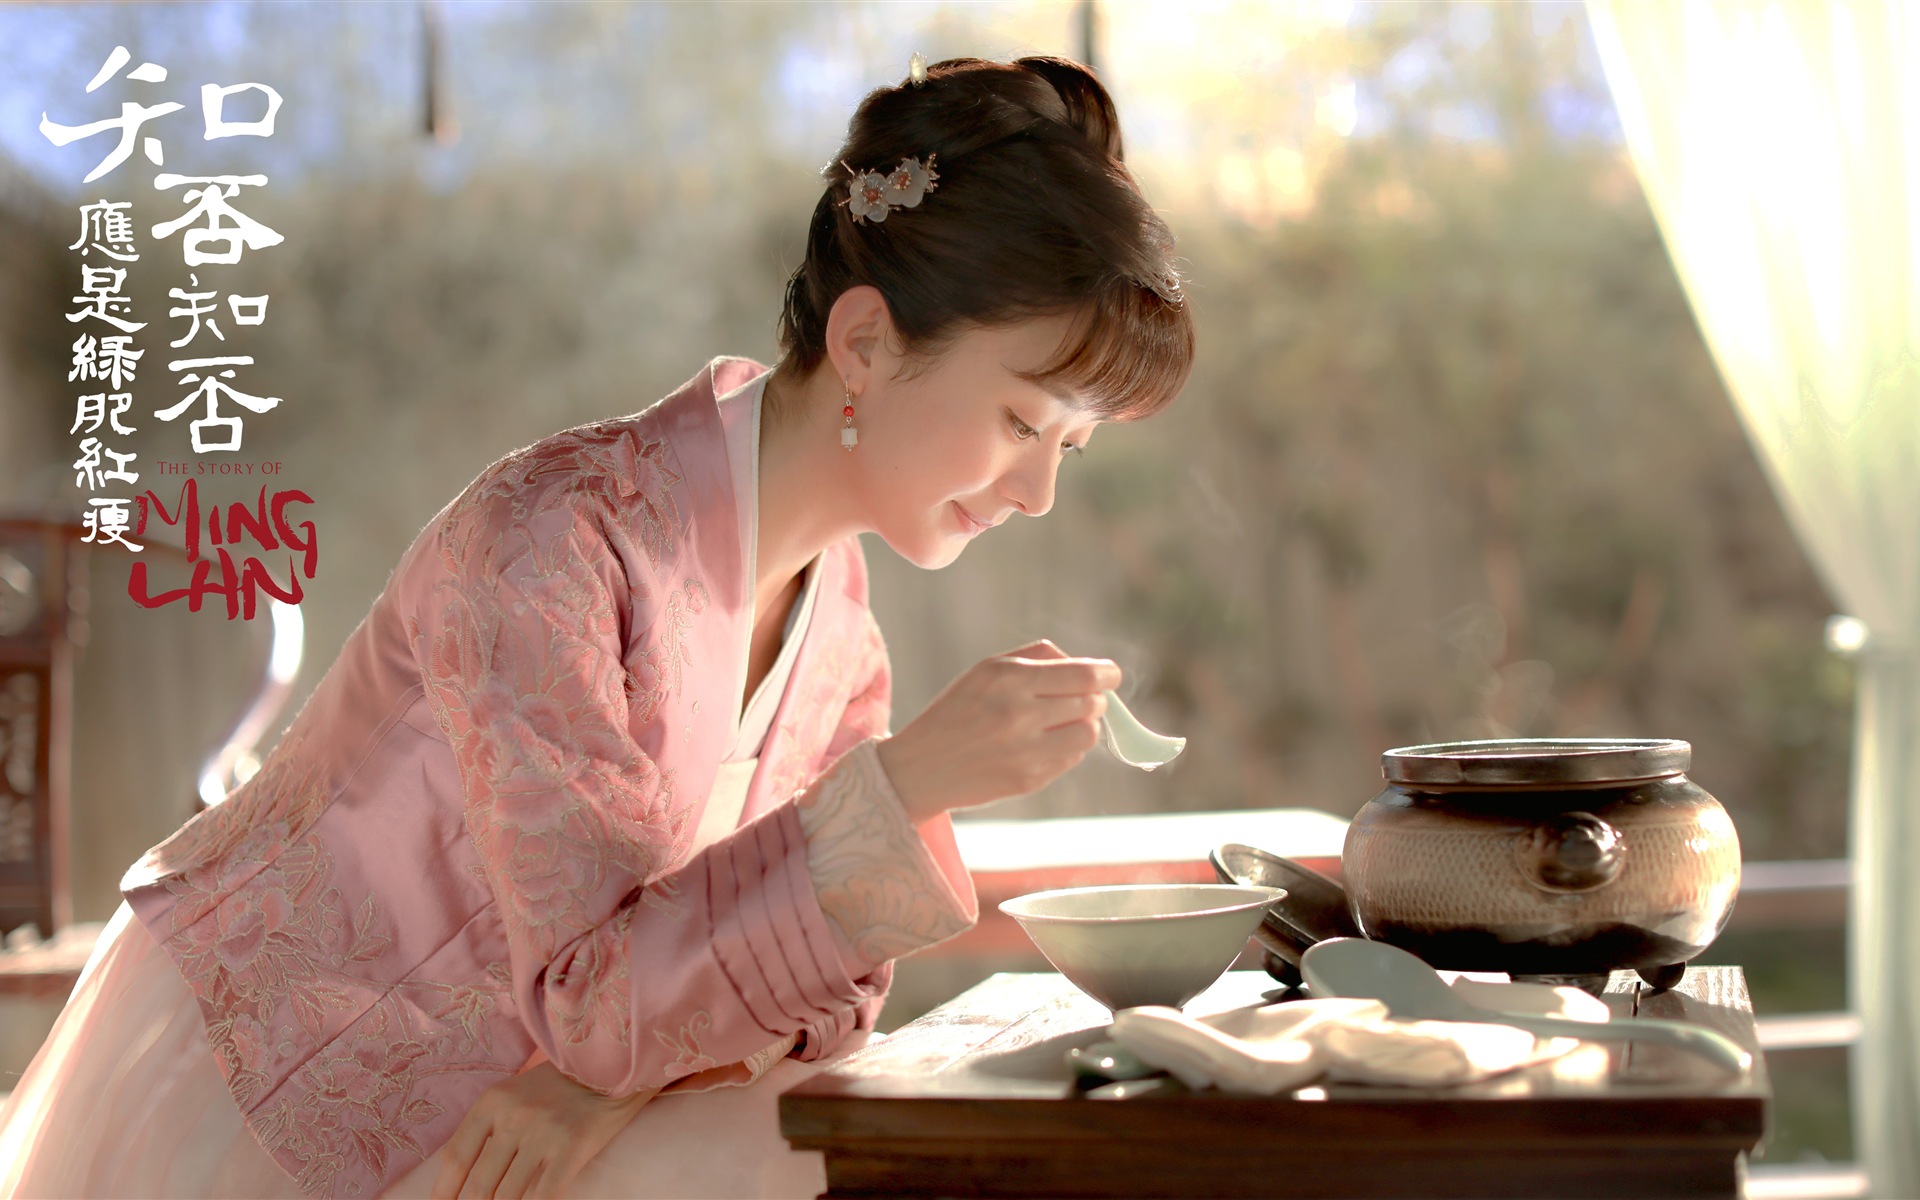 The Story Of MingLan, TV series HD wallpapers #29 - 1920x1200